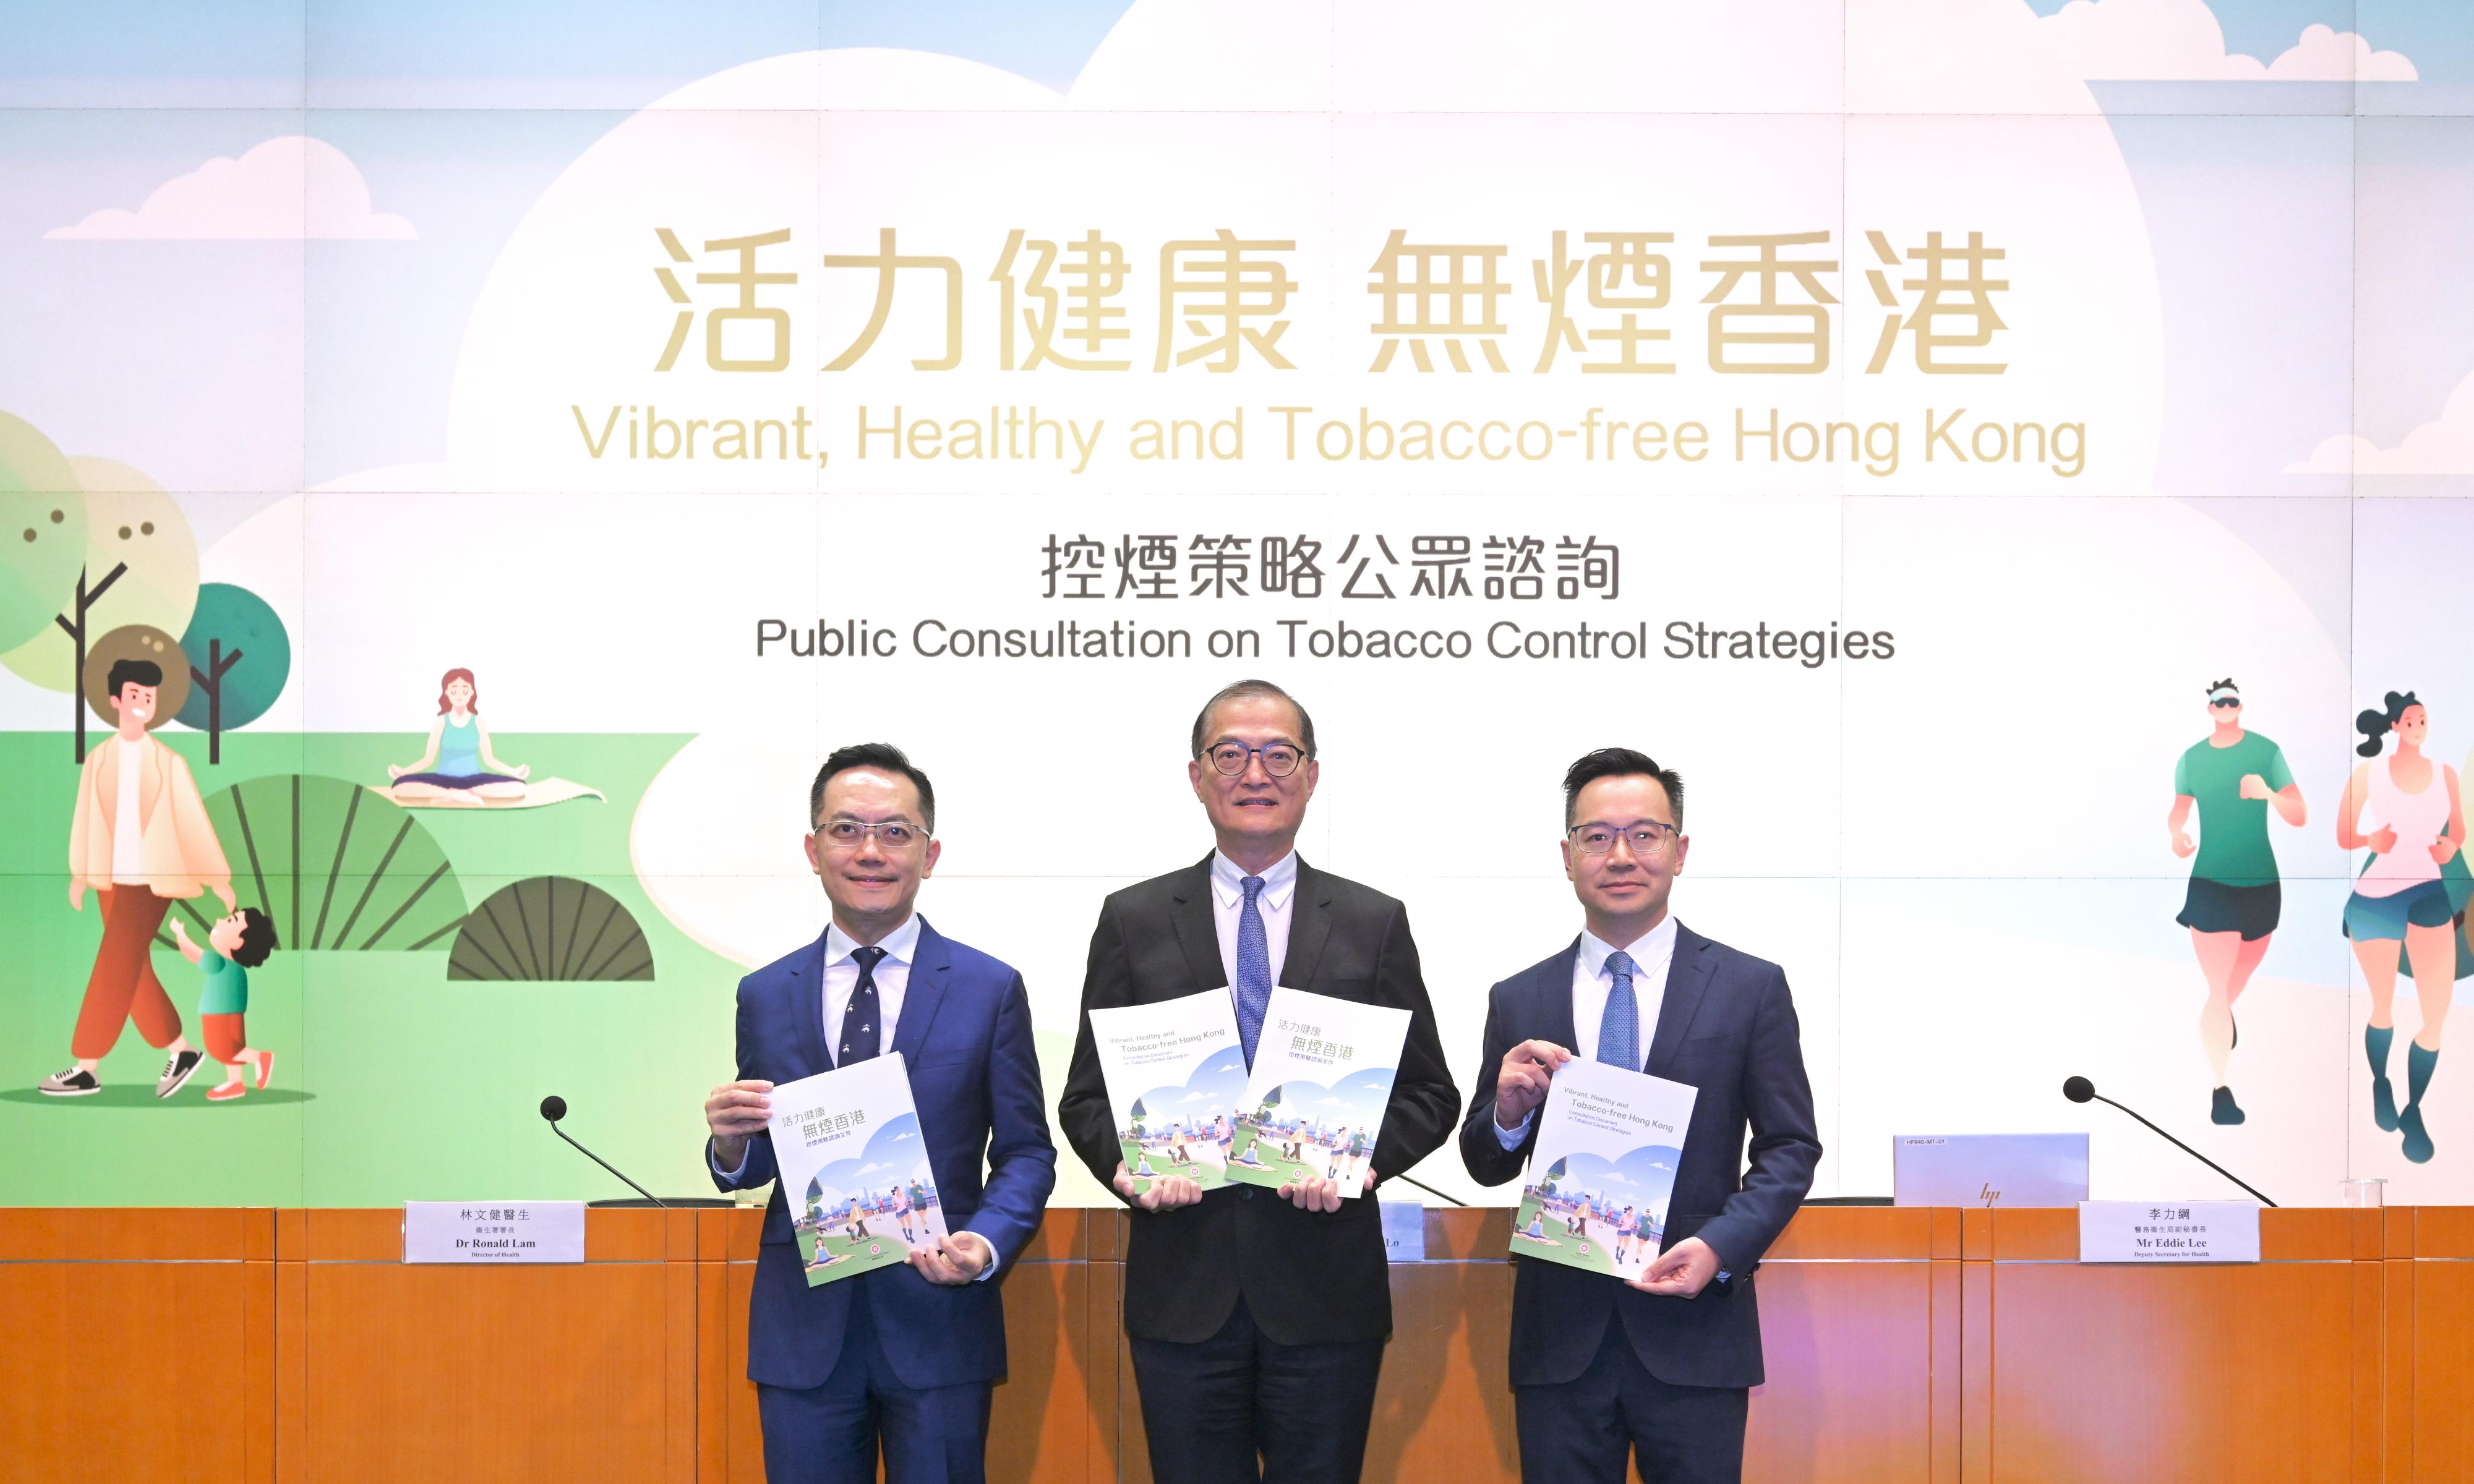 The Secretary for Health, Professor Lo Chung-mau (centre), together with the Director of Health, Dr Ronald Lam (left), and Deputy Secretary for Health Mr Eddie Lee (right), display the Vibrant, Healthy and Tobacco-free Hong Kong public consultation documents on tobacco control strategies at a press conference today (July 12).